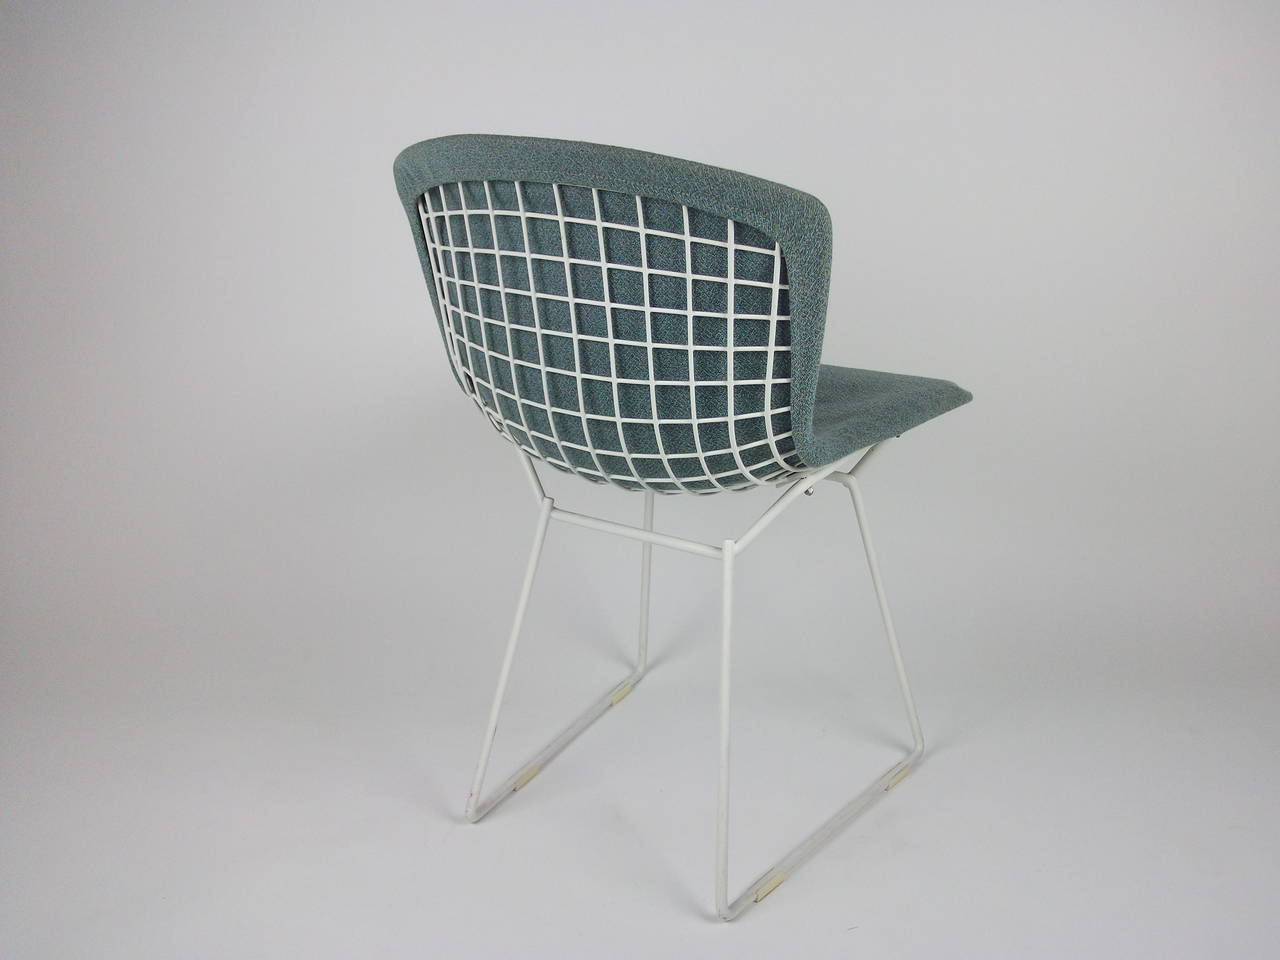 Striking Vintage pair of Wire chairs designed by Harry Bertoia for Knoll - these ones were distributed in Canada - the original baby blue fabric is in amazing vintage condition/  There is minor paint loss under one chair by the bolt - see pic -